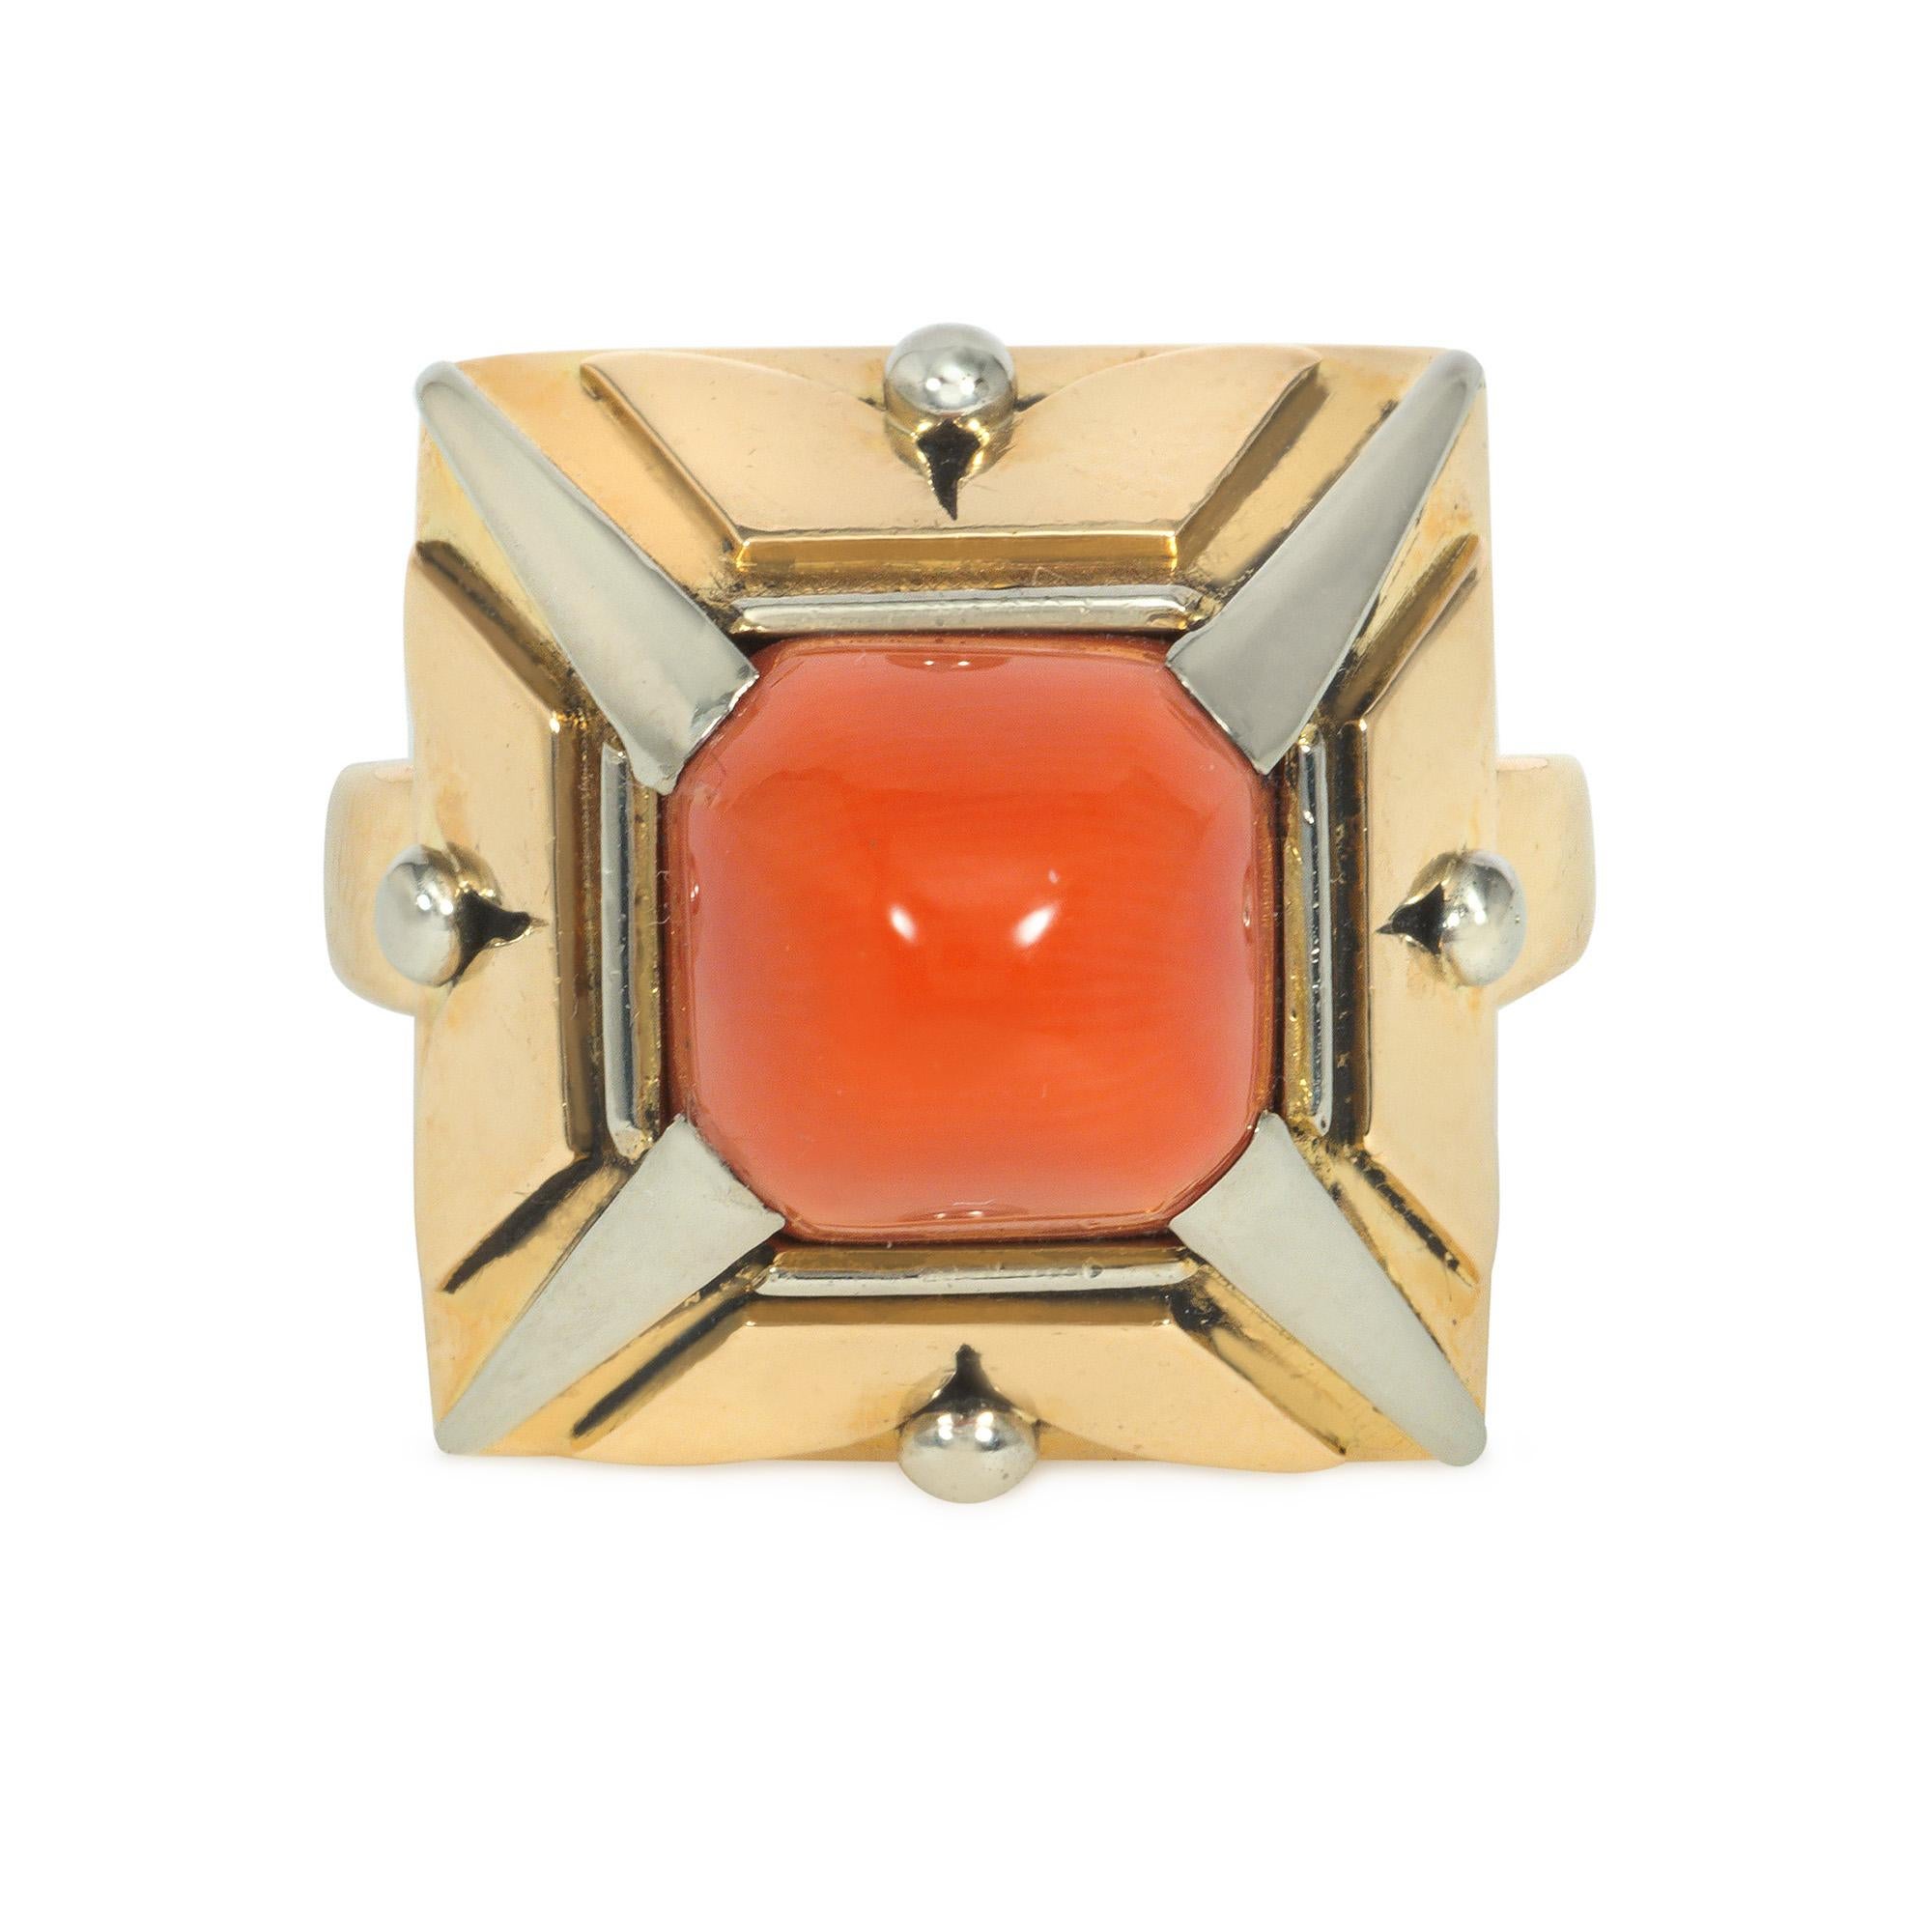 An Art Deco coral, platinum, and gold ring of pyramidal design, centered by a sugarloaf coral with pierced gold sides separated by tapering platinum bars, in 18k.  Face-up dimensions approximately 0.75